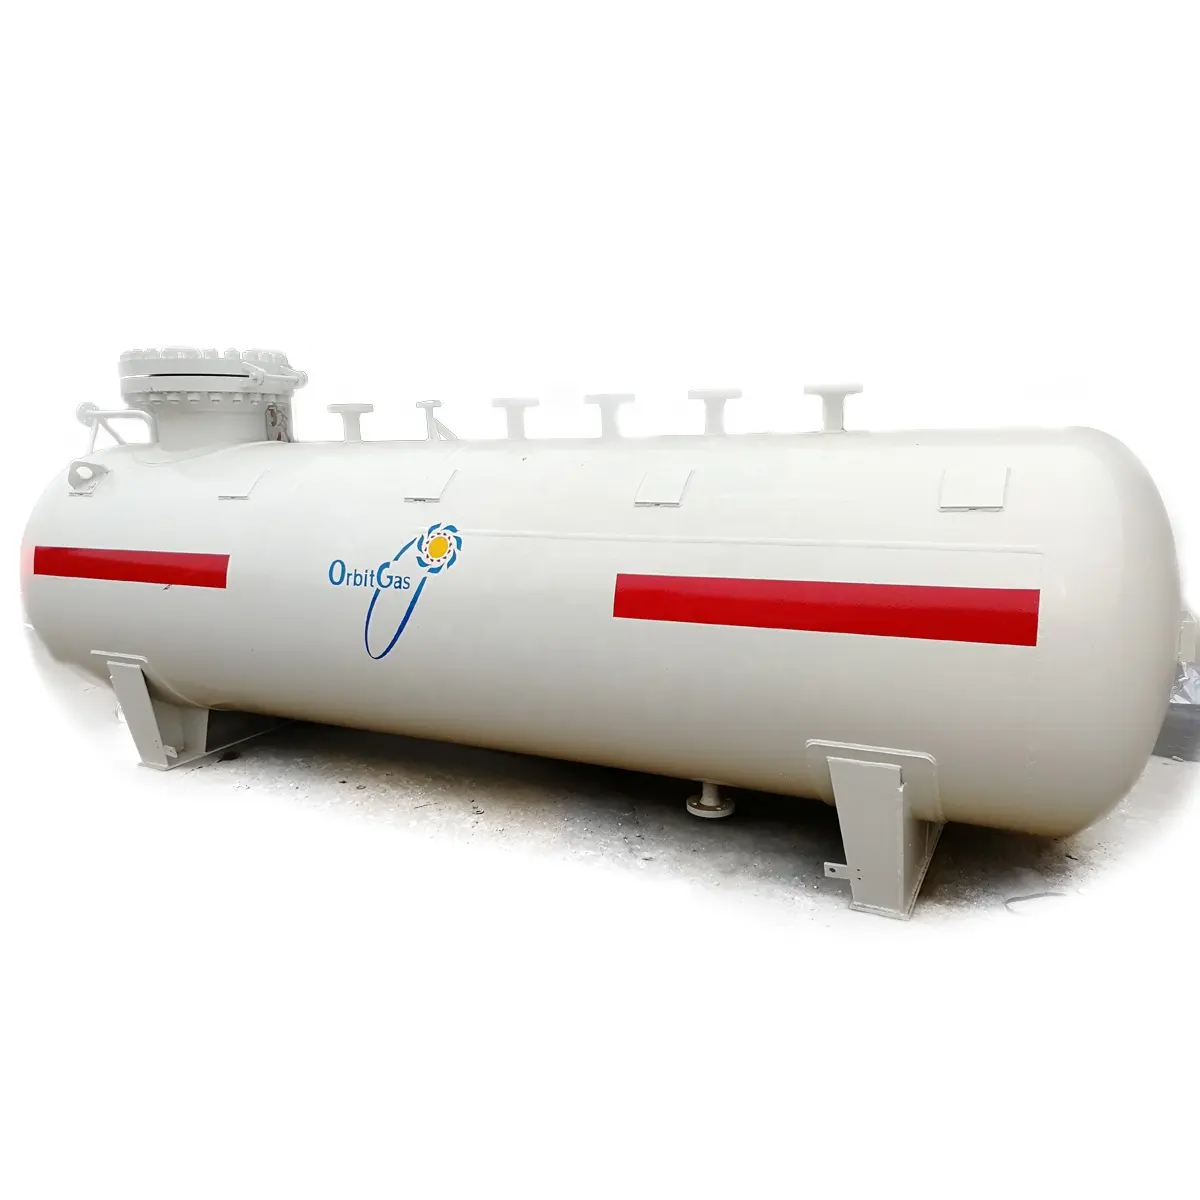 LPG Cooking Gas Tank for Filling Gas Cylinder Used 2.5 ton LPG Gas Tank